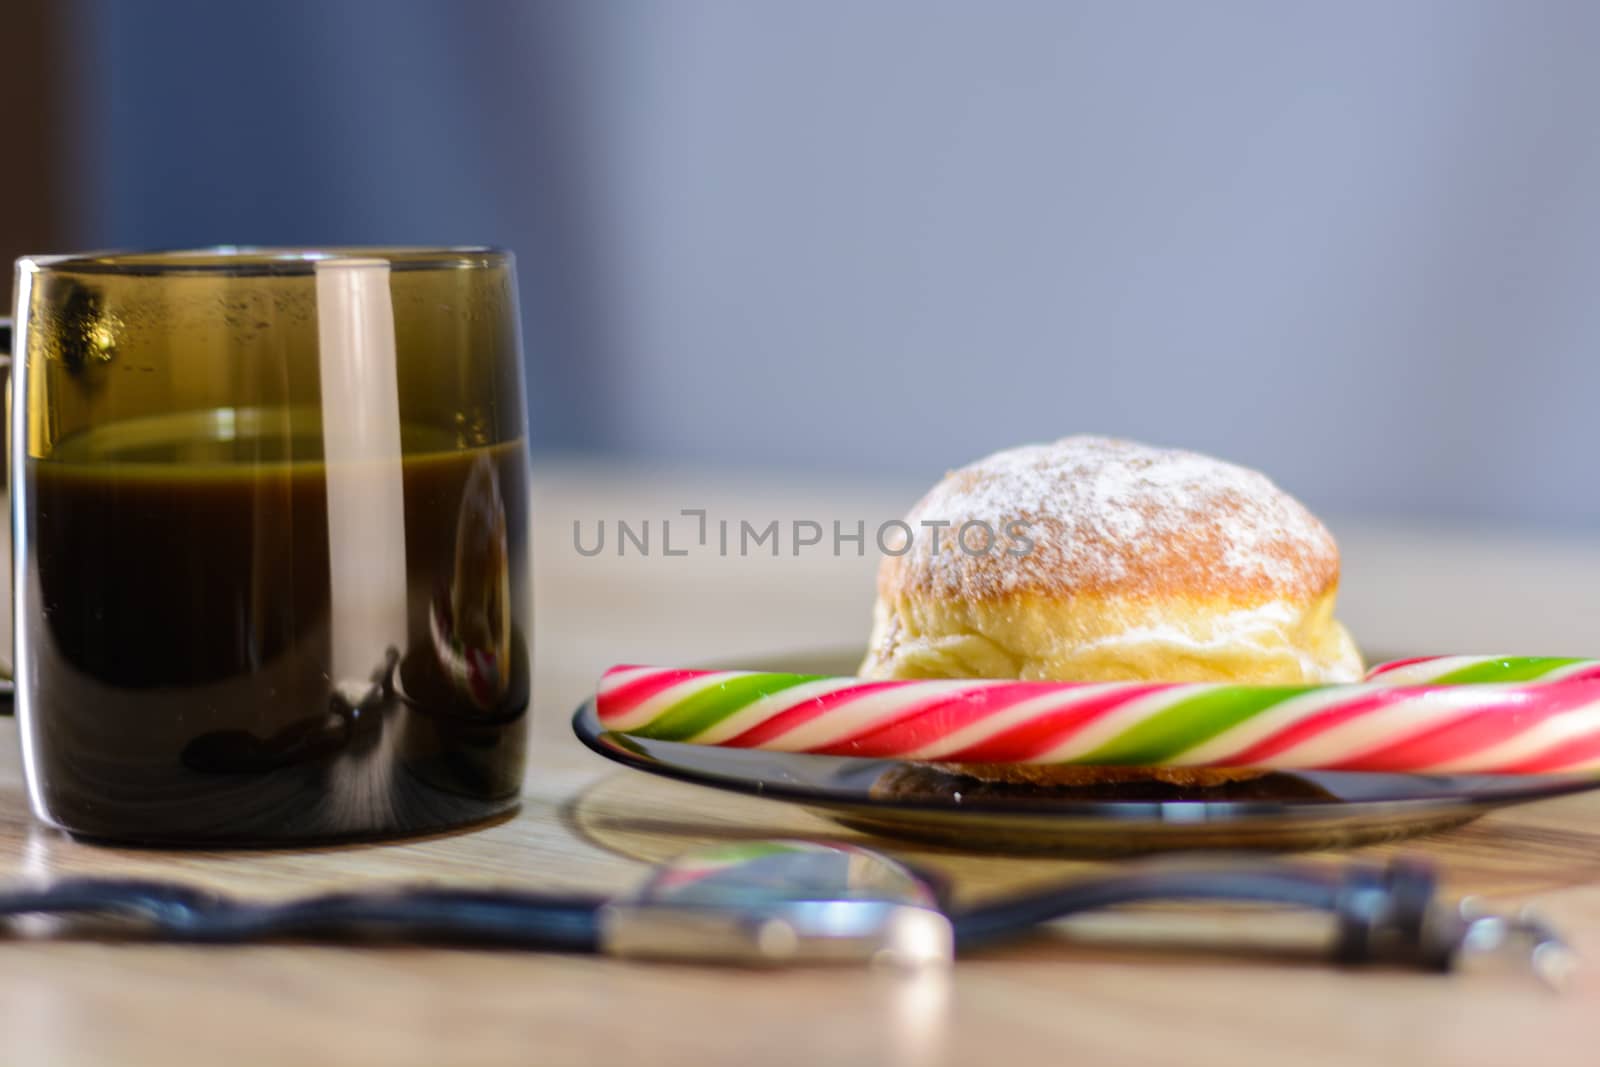 on the plate of a bun and candy along with coffee by boys1983@mail.ru